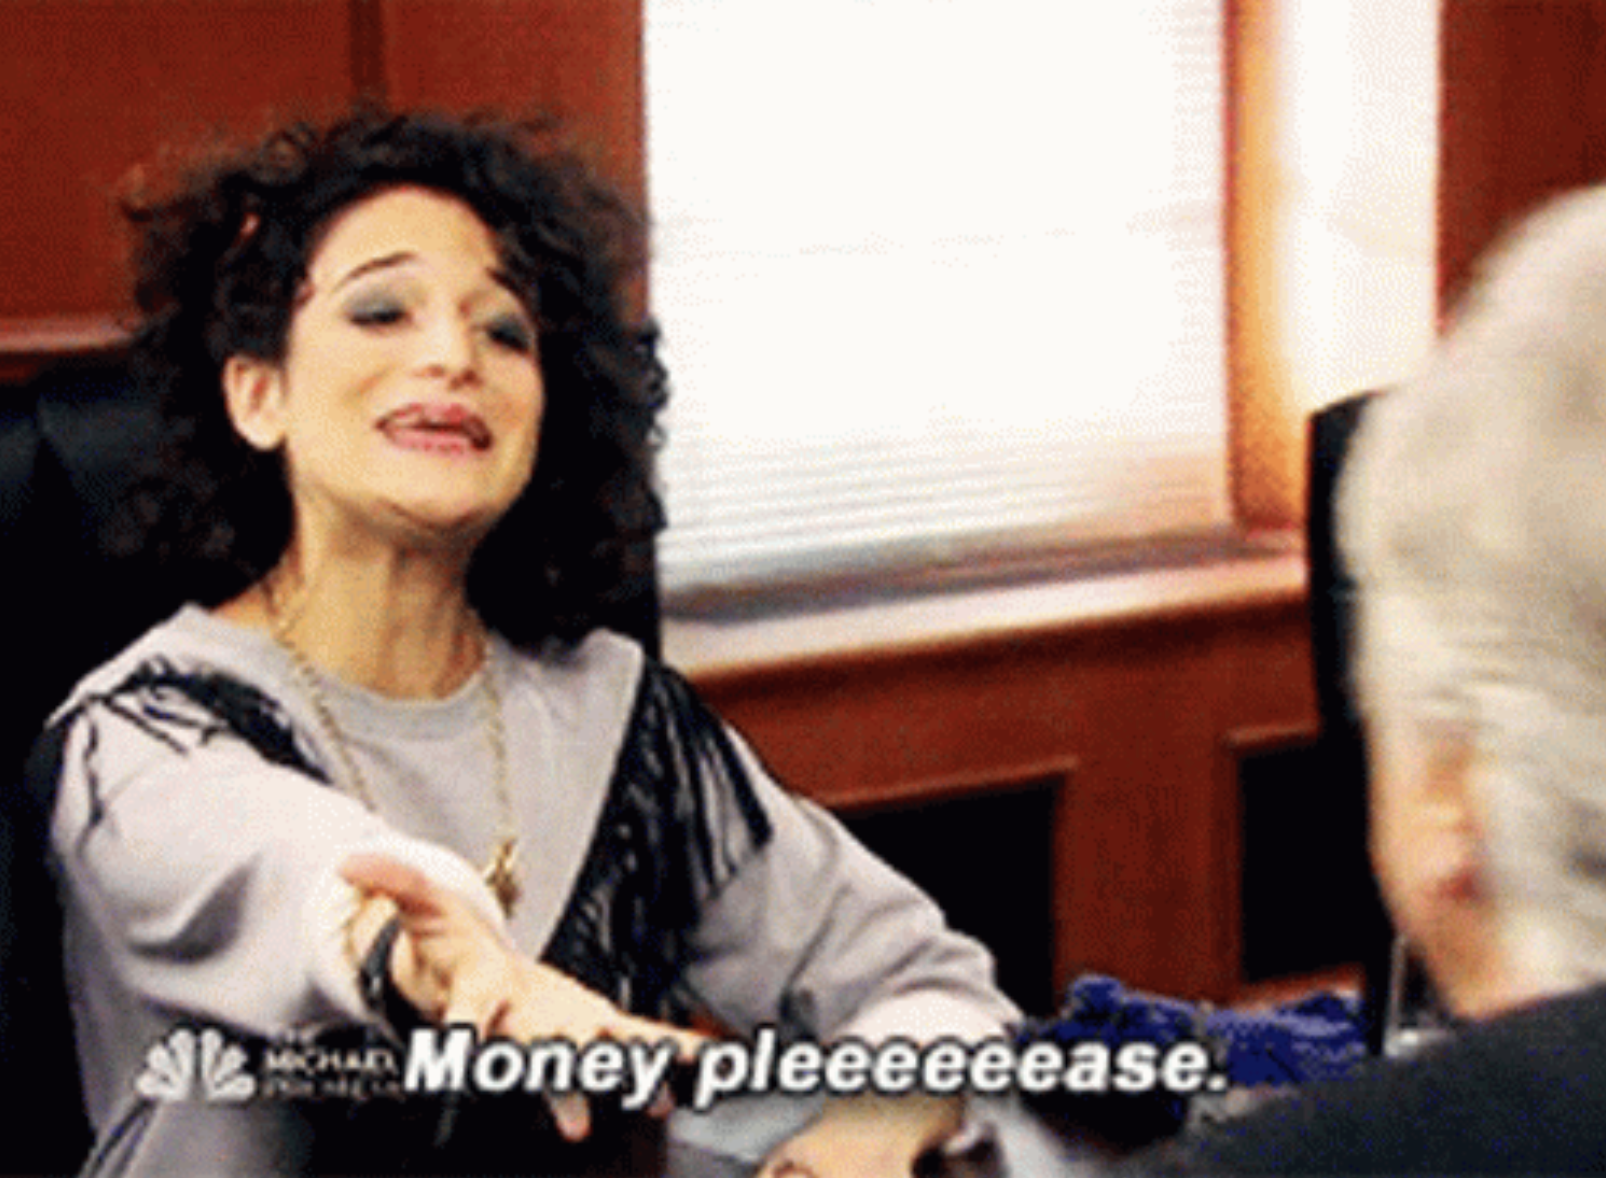 Jenny Slate in the TV show Parks & Rec saying "money please" to her father